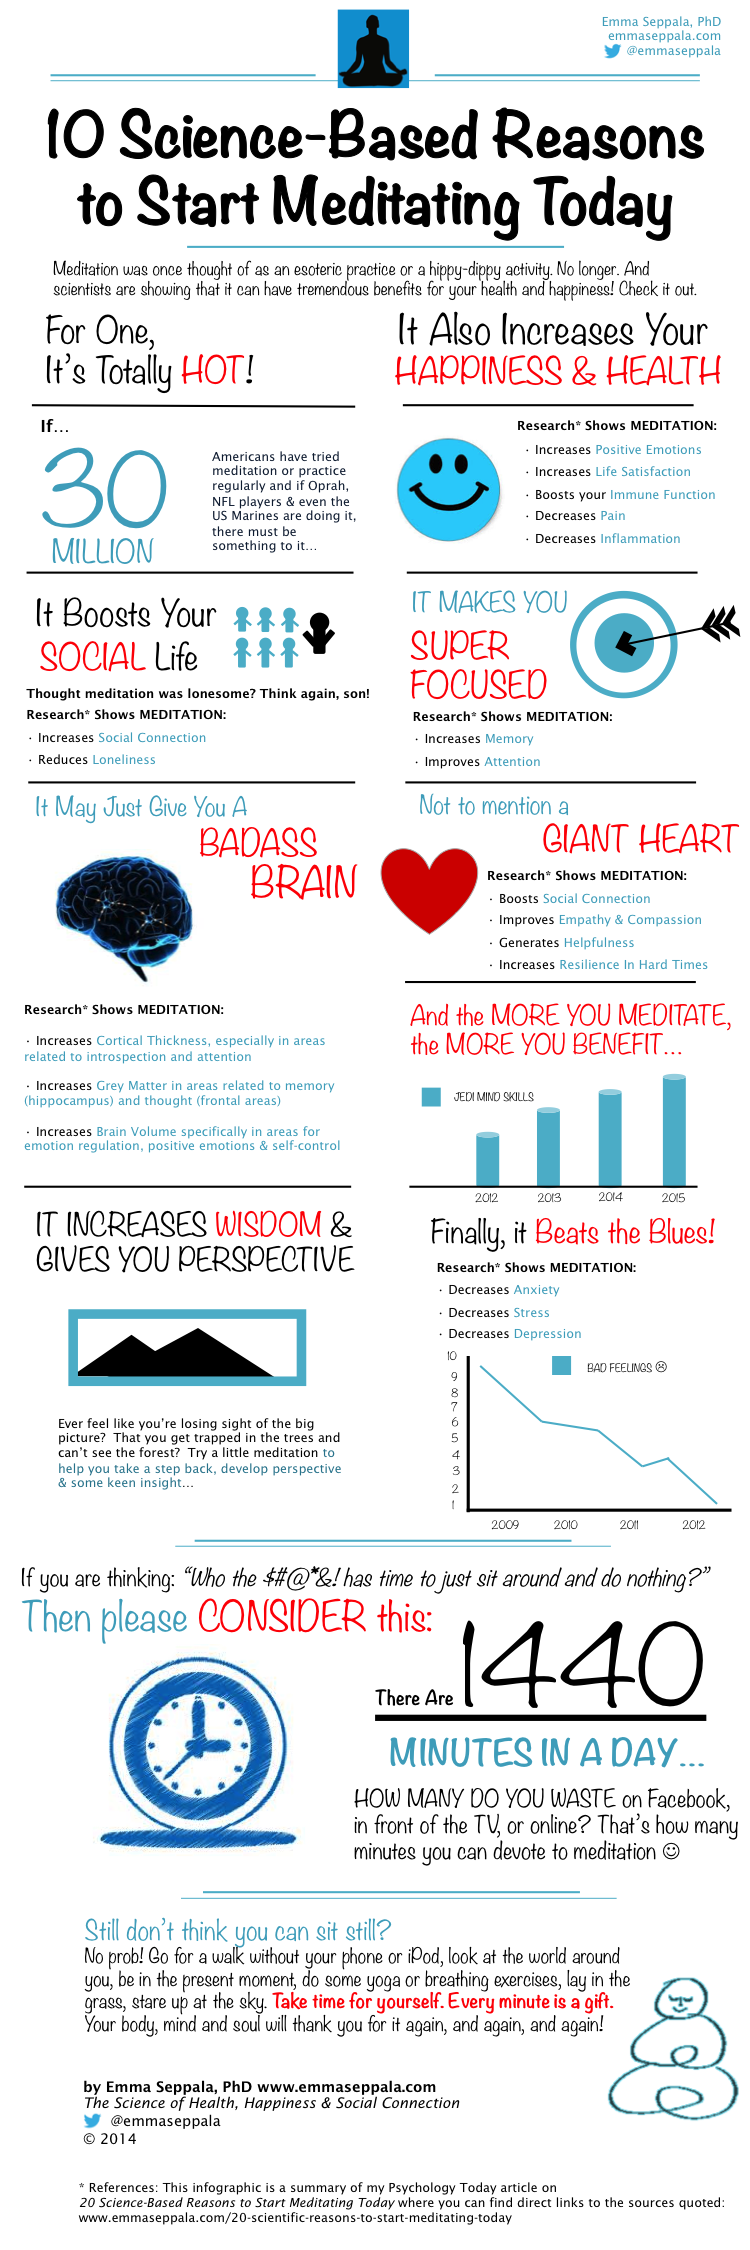 10-Science-Based-Reasons-To-Start-Meditating-Today-INFOGRAPHIC